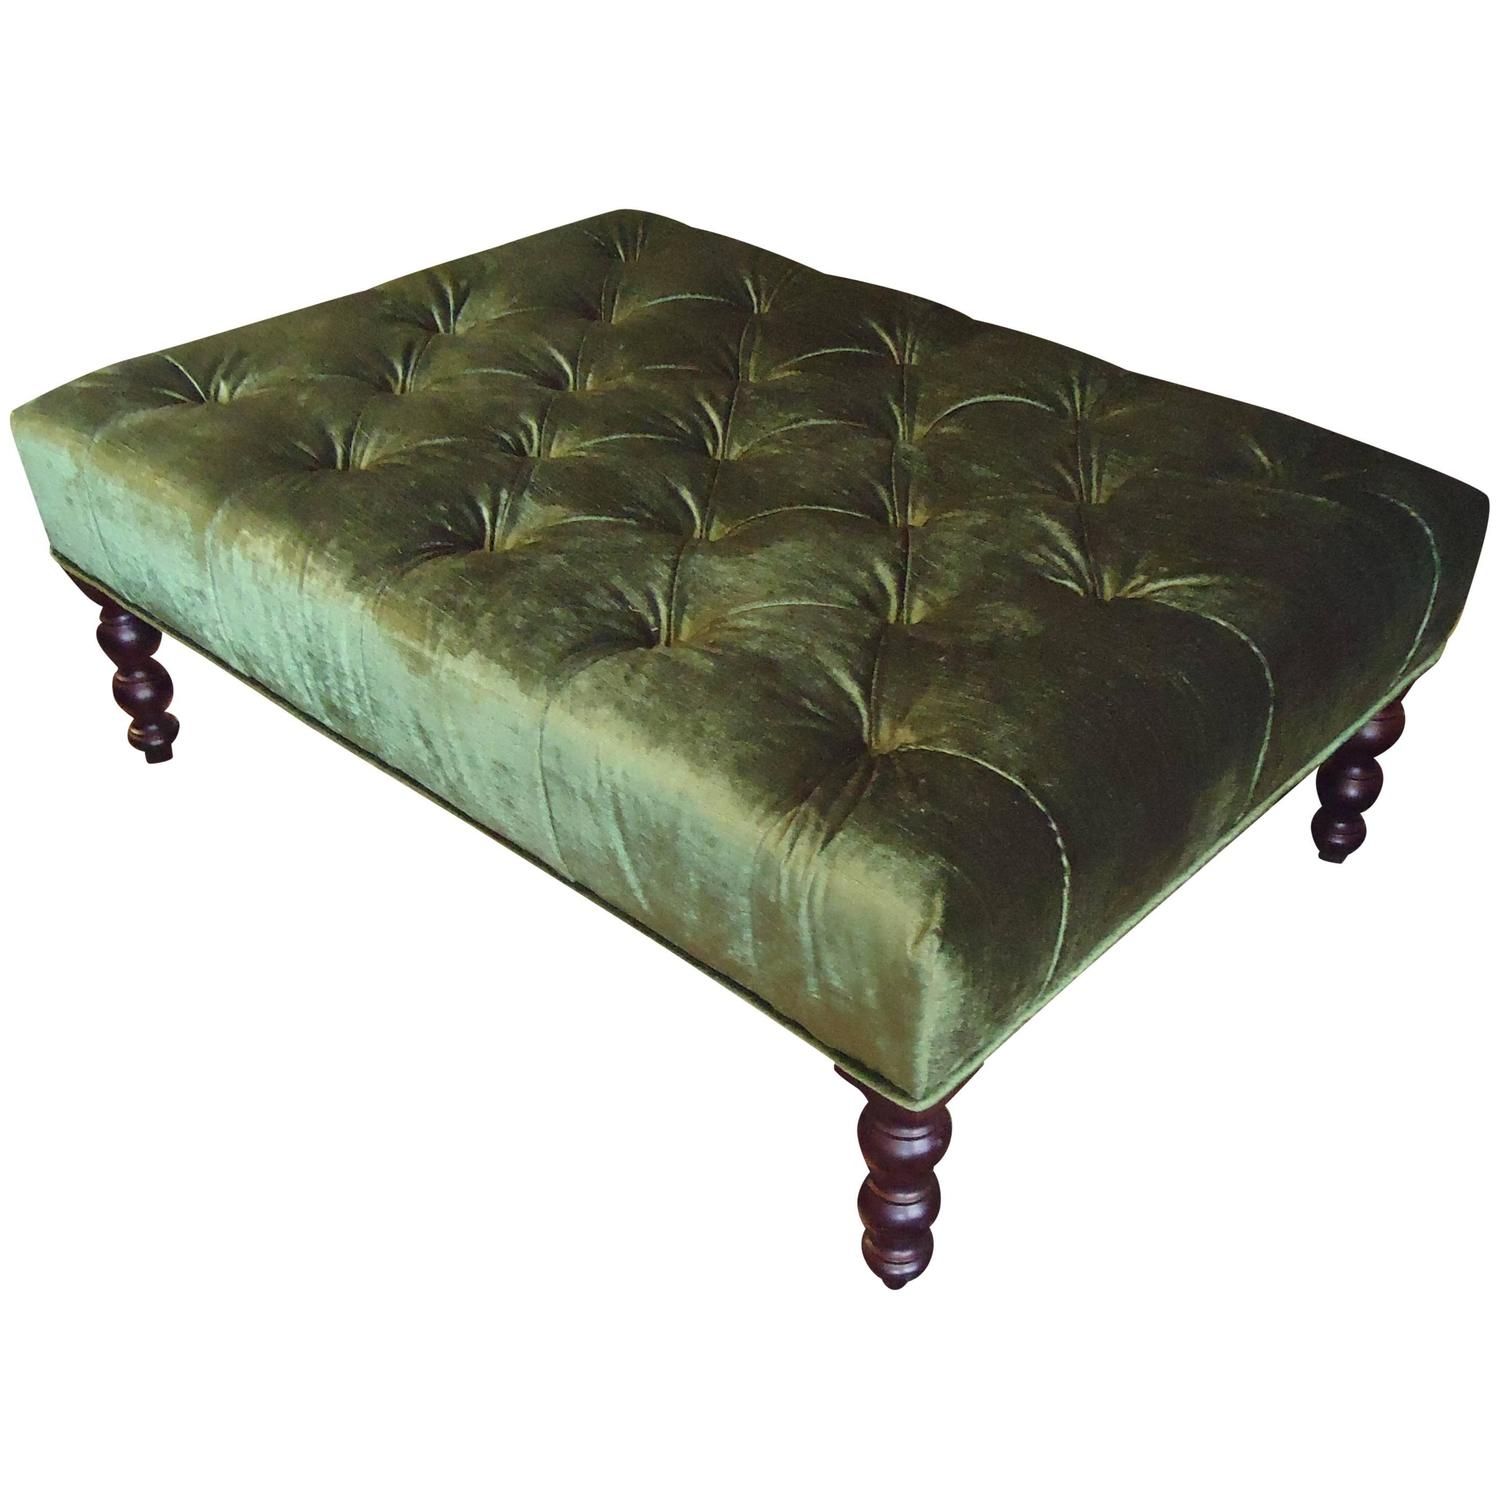 Rich Green Tufted Velvet Ottoman For Sale At 1stdibs Intended For Tufted Gray Velvet Ottomans (View 3 of 20)